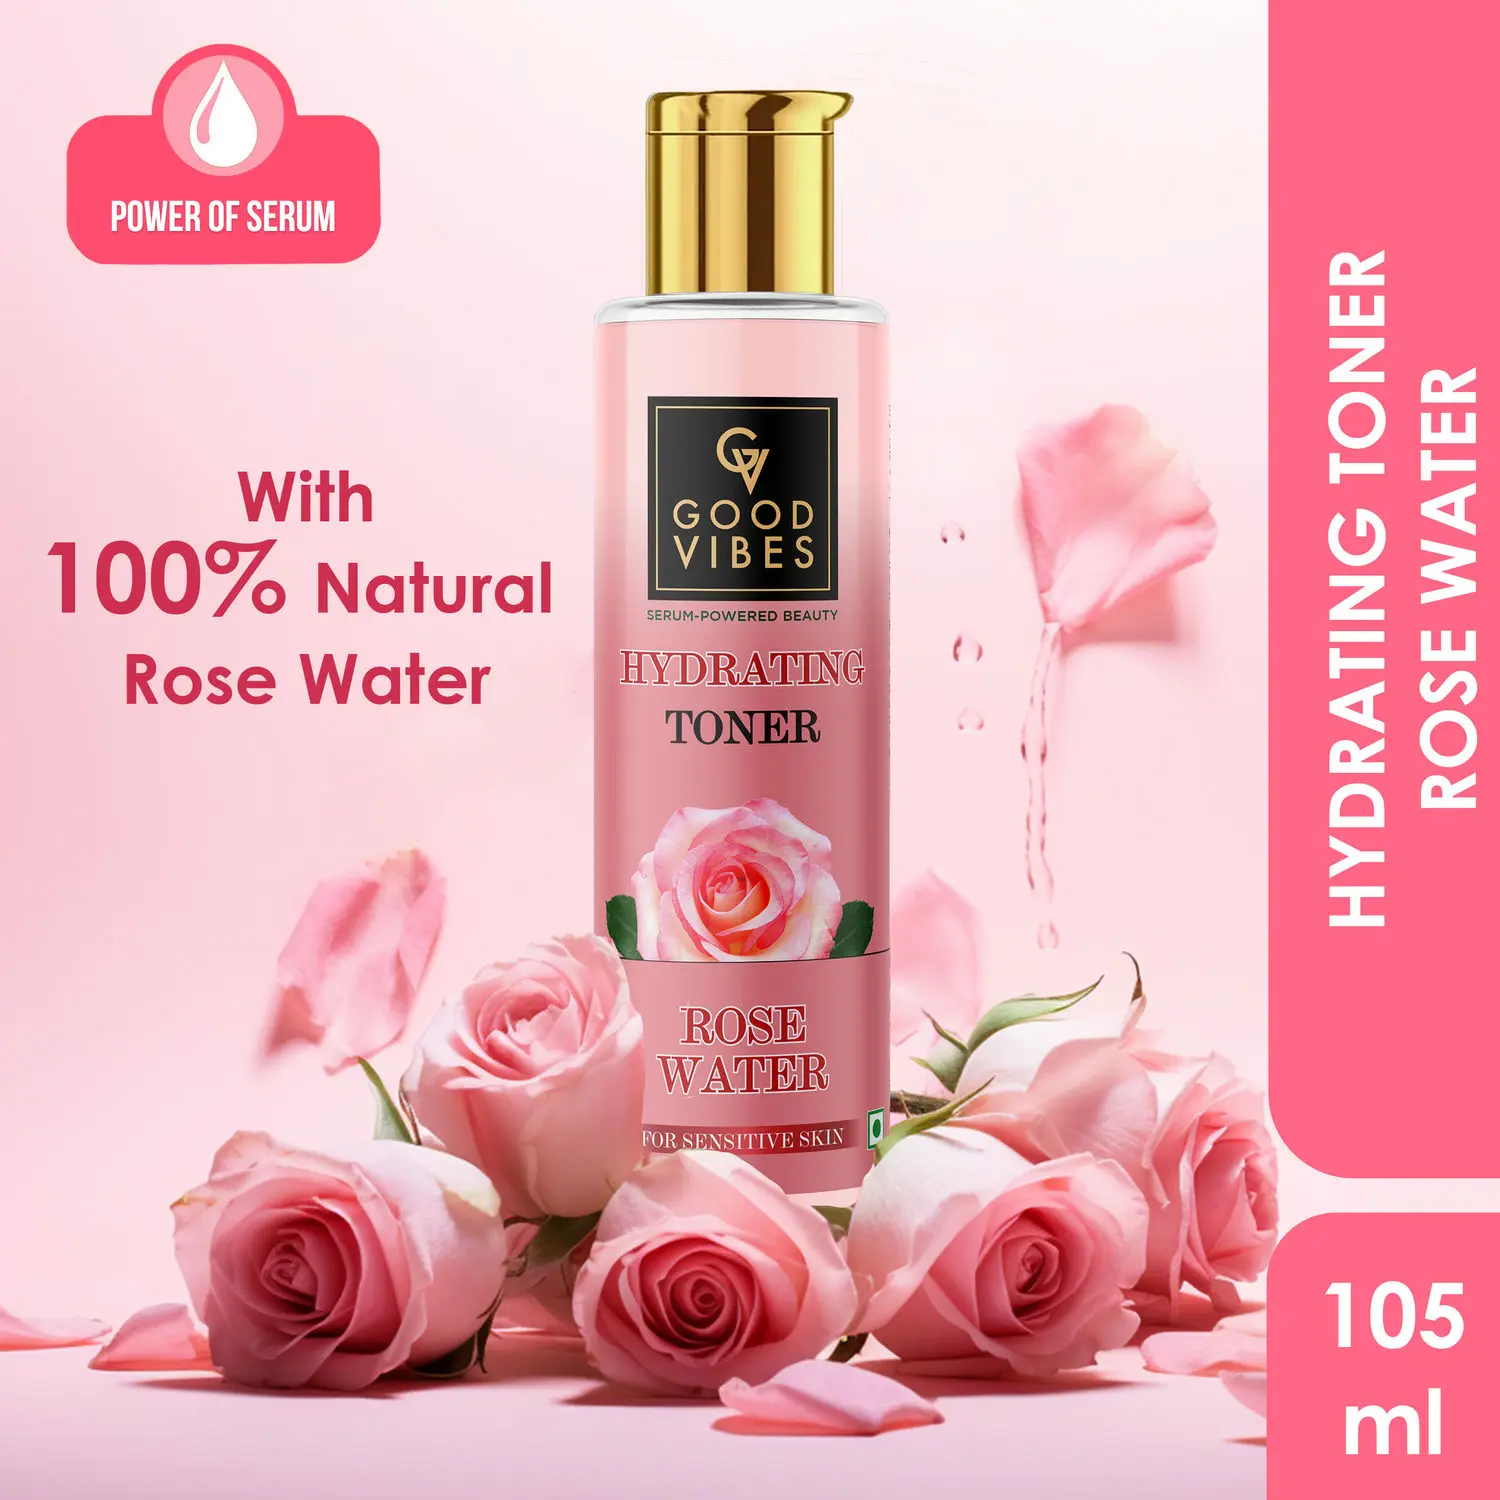 Good Vibes Hydrating Toner Rose Water with Power Of Serum (105ml) | Dermatologically Tested for Sensitive skin | With 100% Natural Rose Water